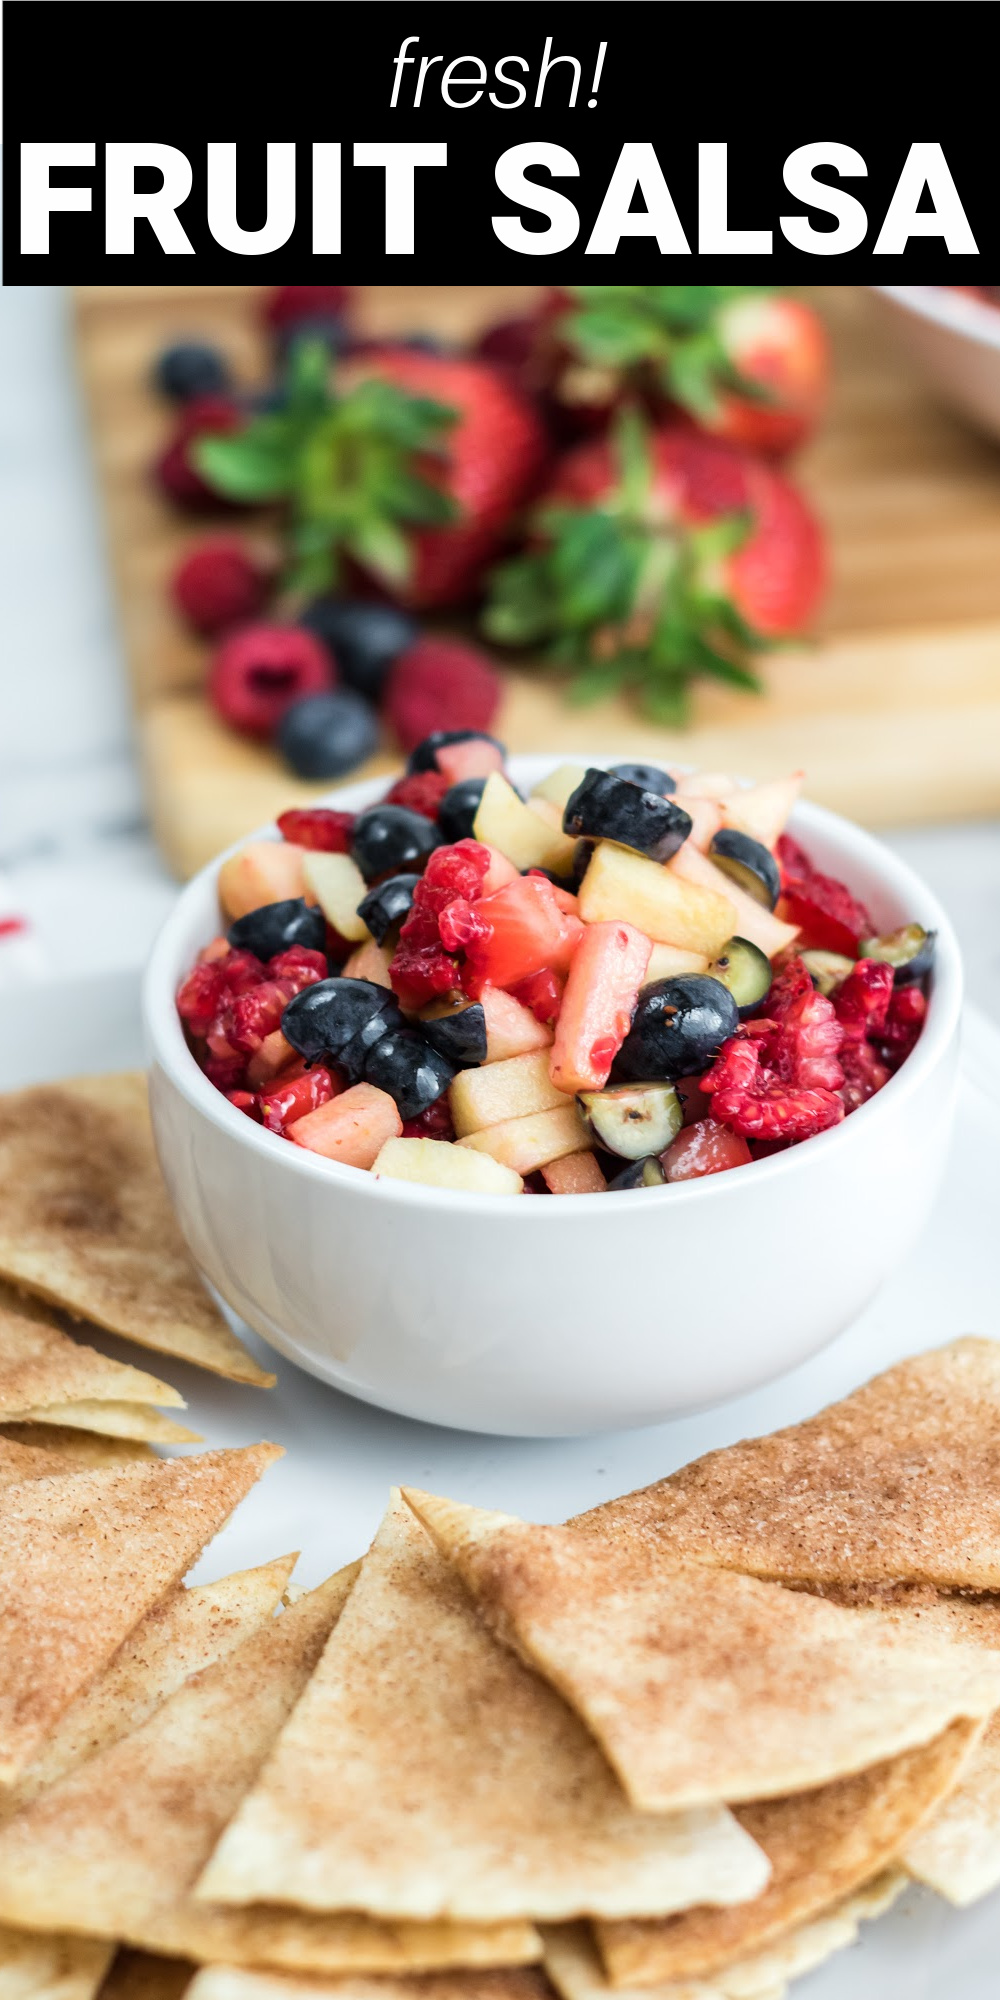 This simple fruit salsa with cinnamon chips is the perfect summer treat. Not only does it use fresh berries but it also pairs it up perfectly with crunchy and sweet cinnamon chips. It's make a wonderful healthy appetizer or fresh dessert.